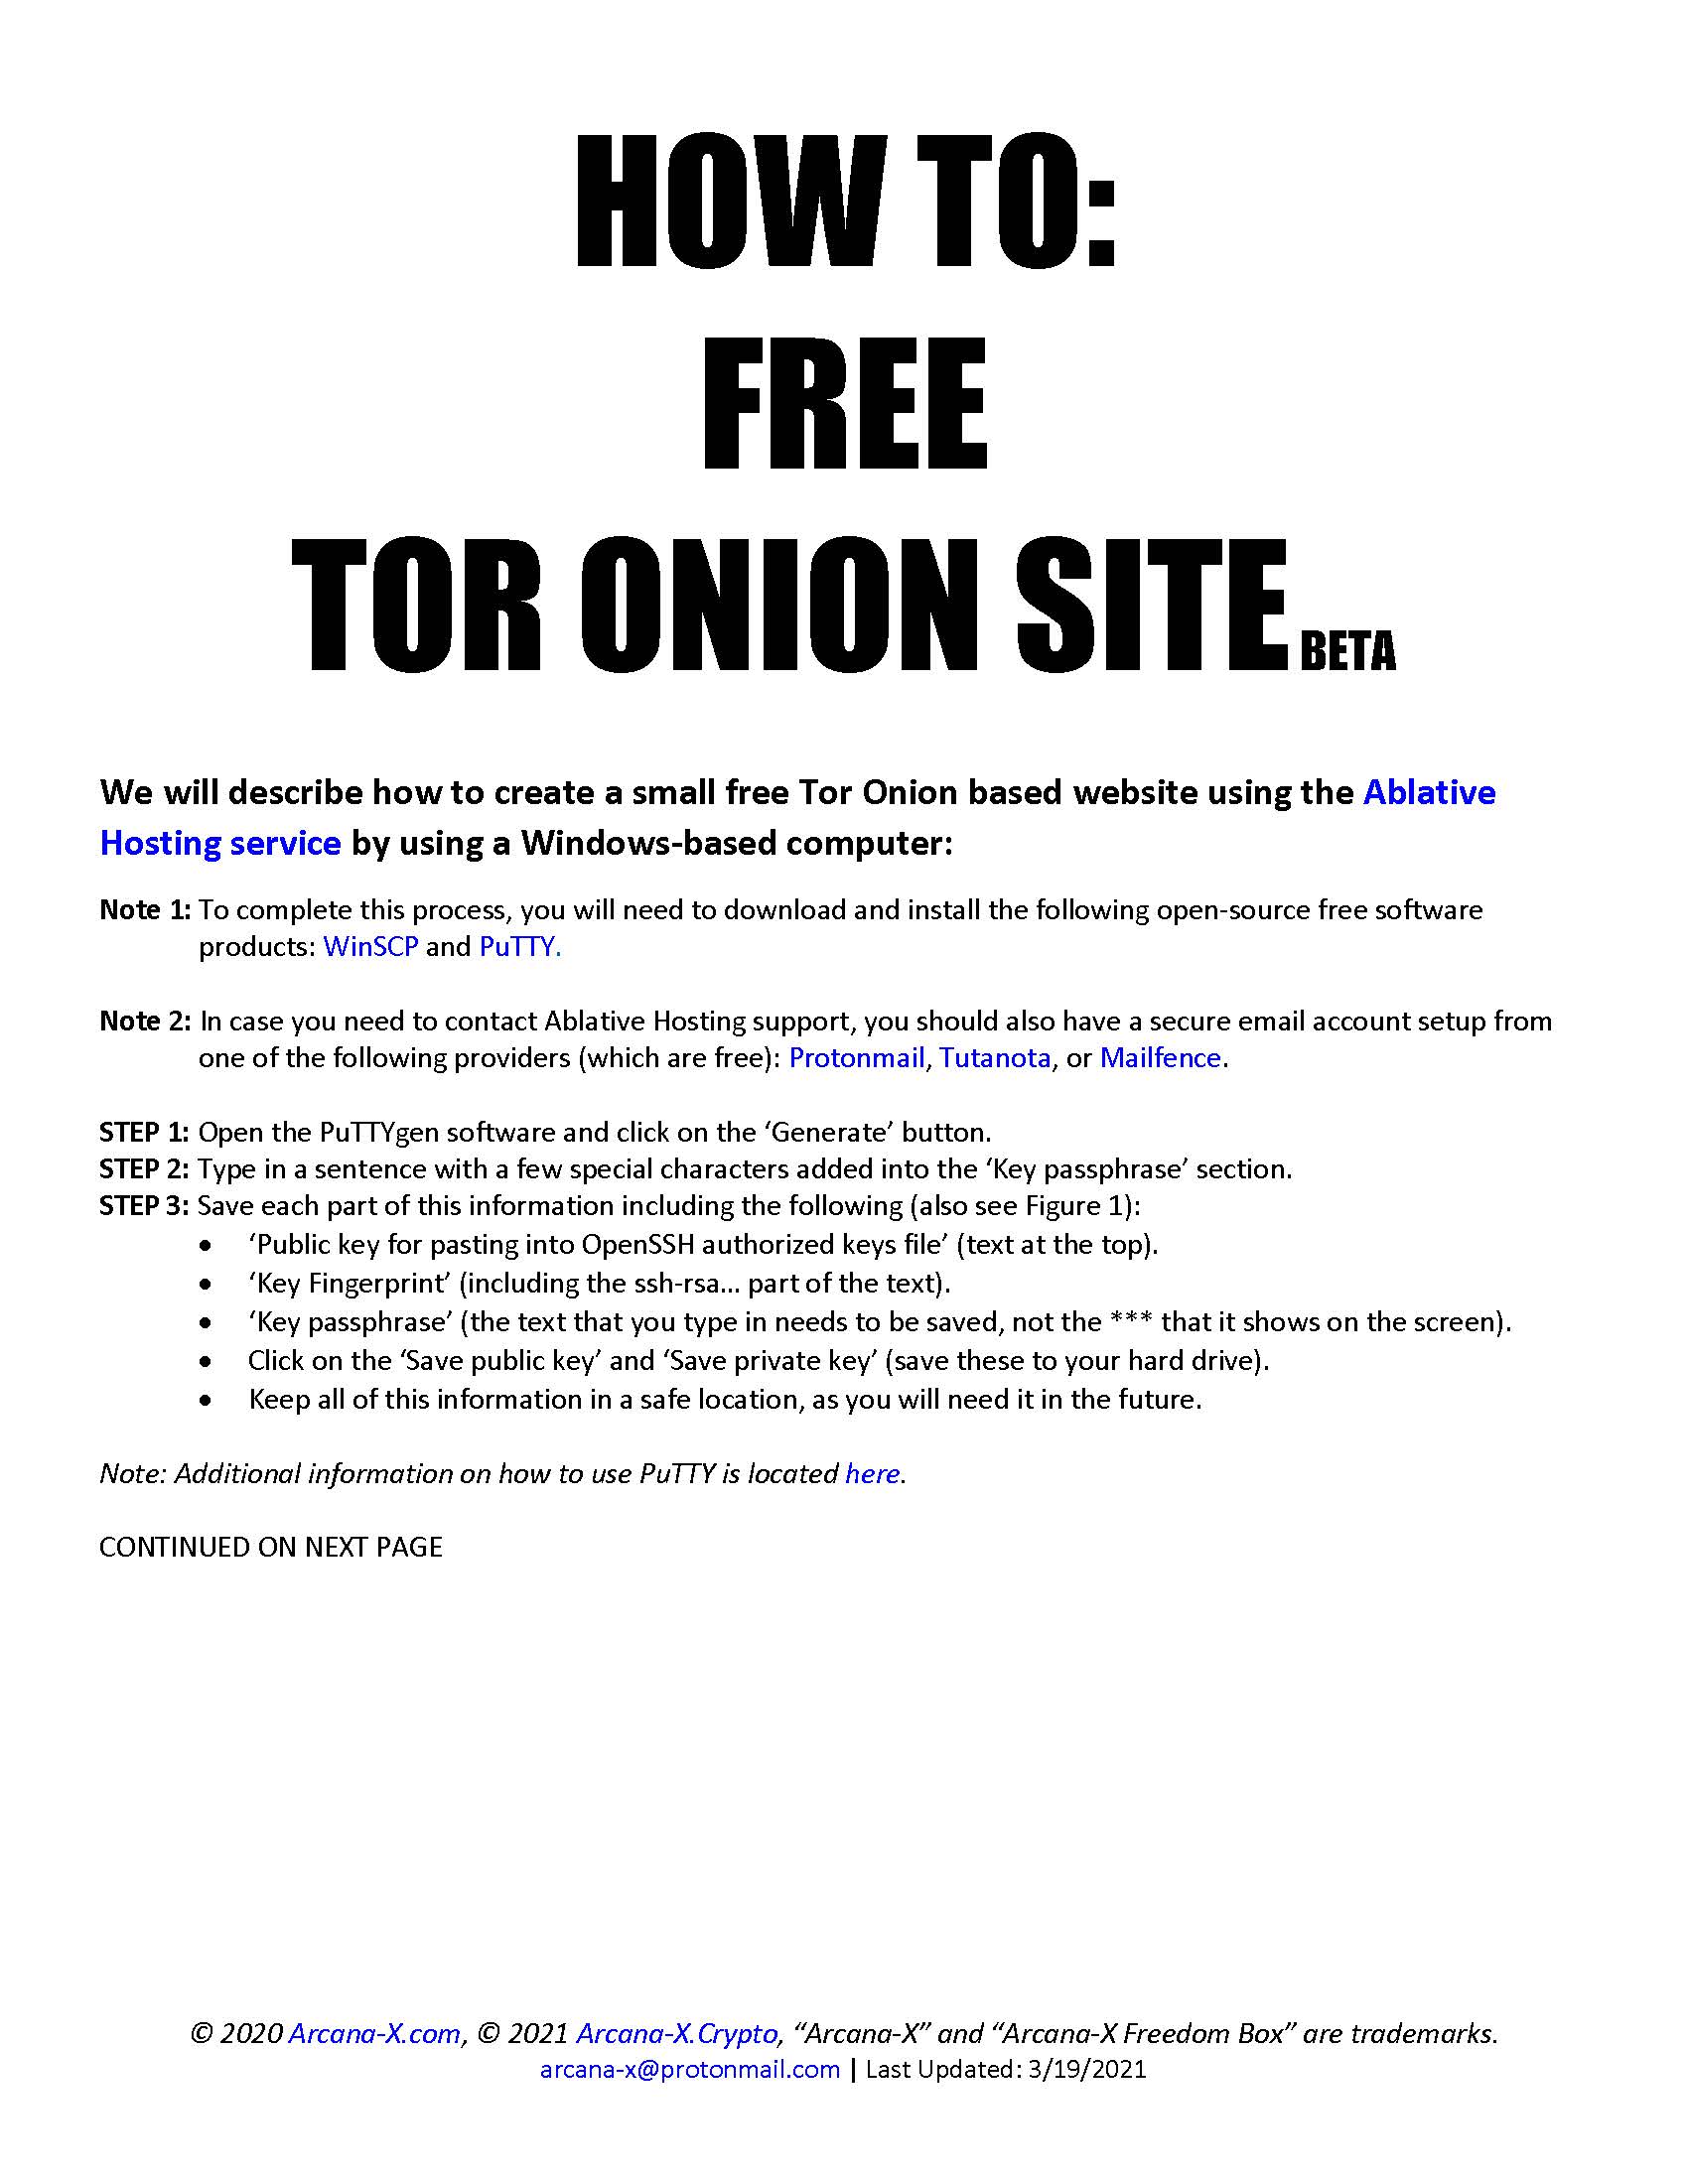 HOW TO: FREE TOR ONION SITE